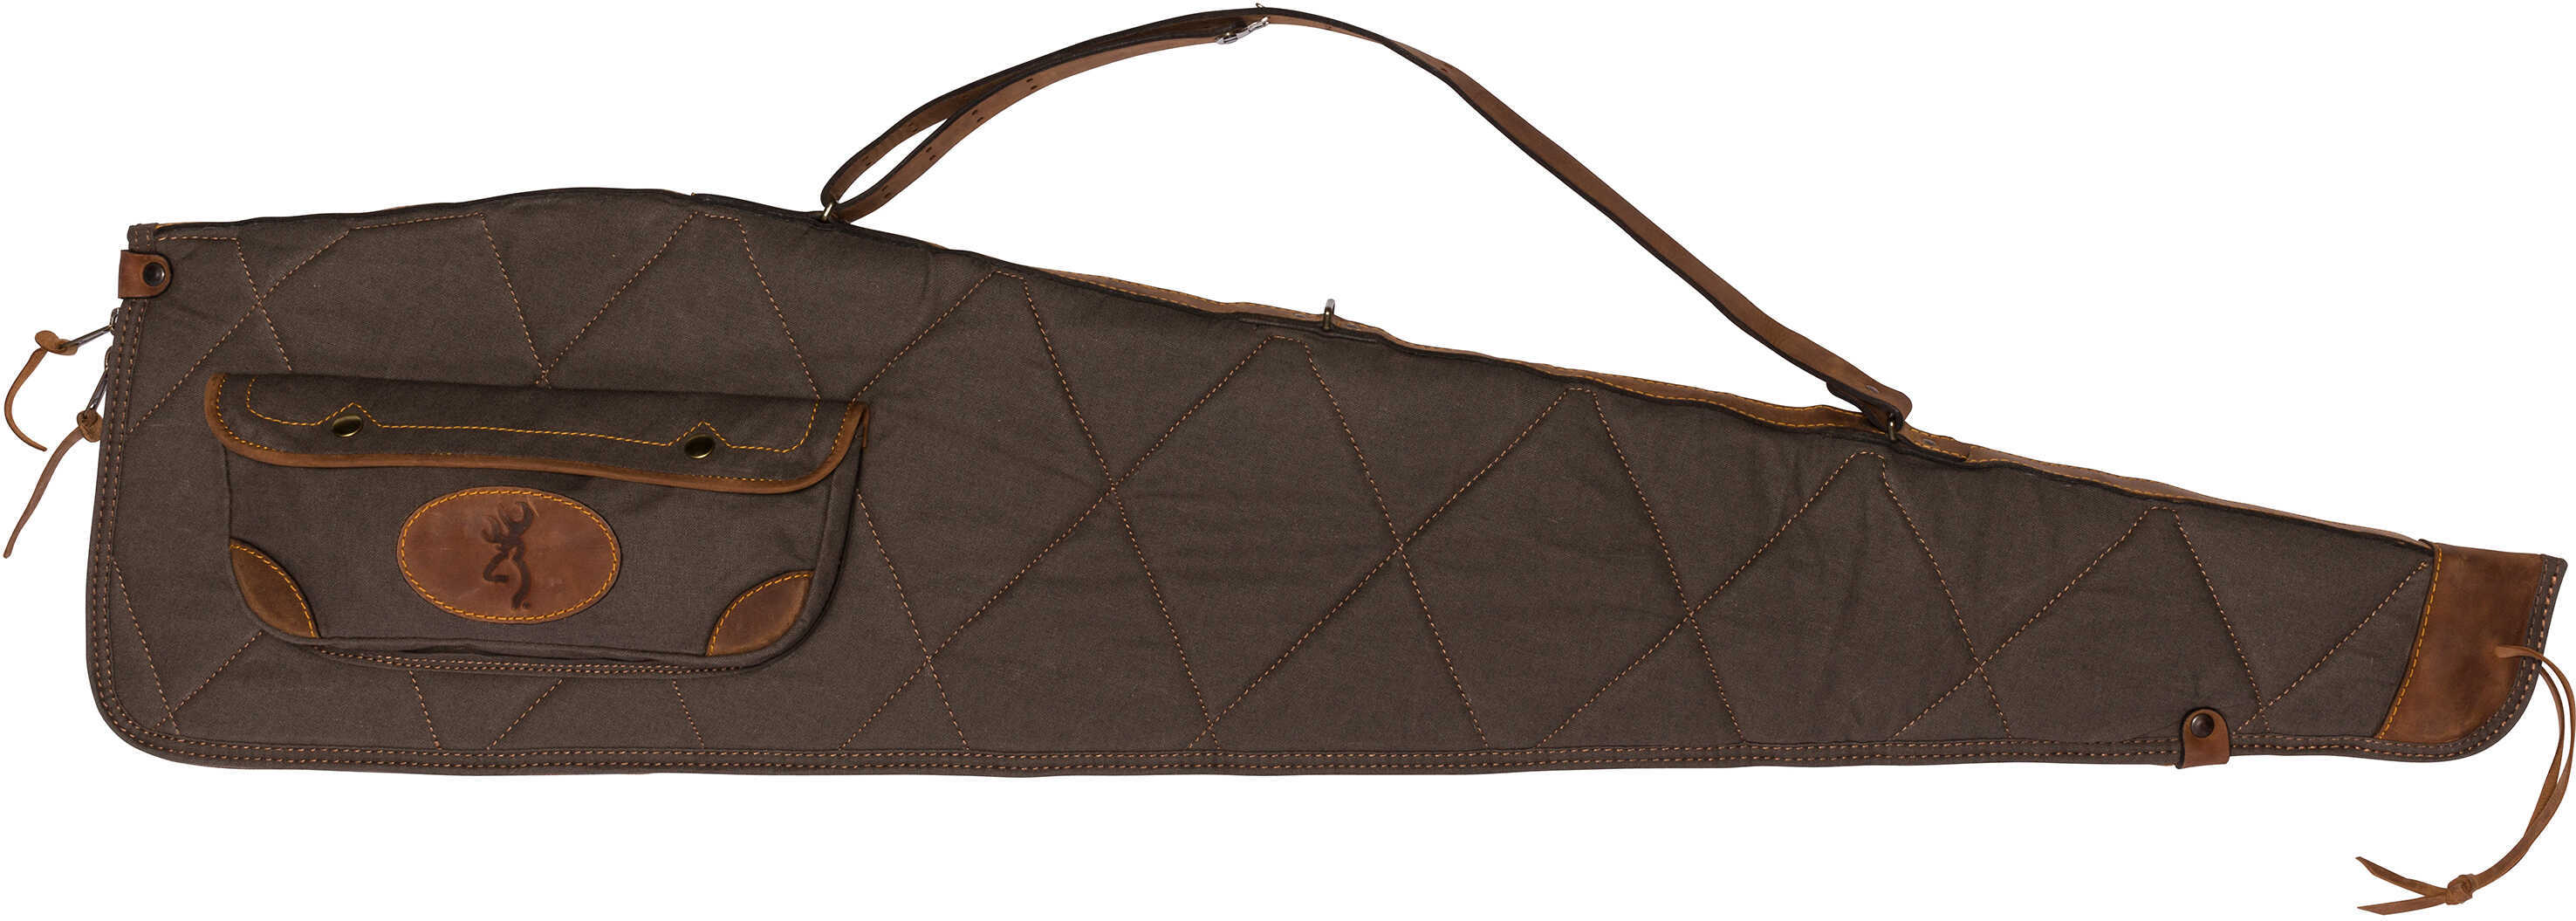 Browning Lona Canvas/Leather Rifle Case, Flint/Brown Model: 1413886948